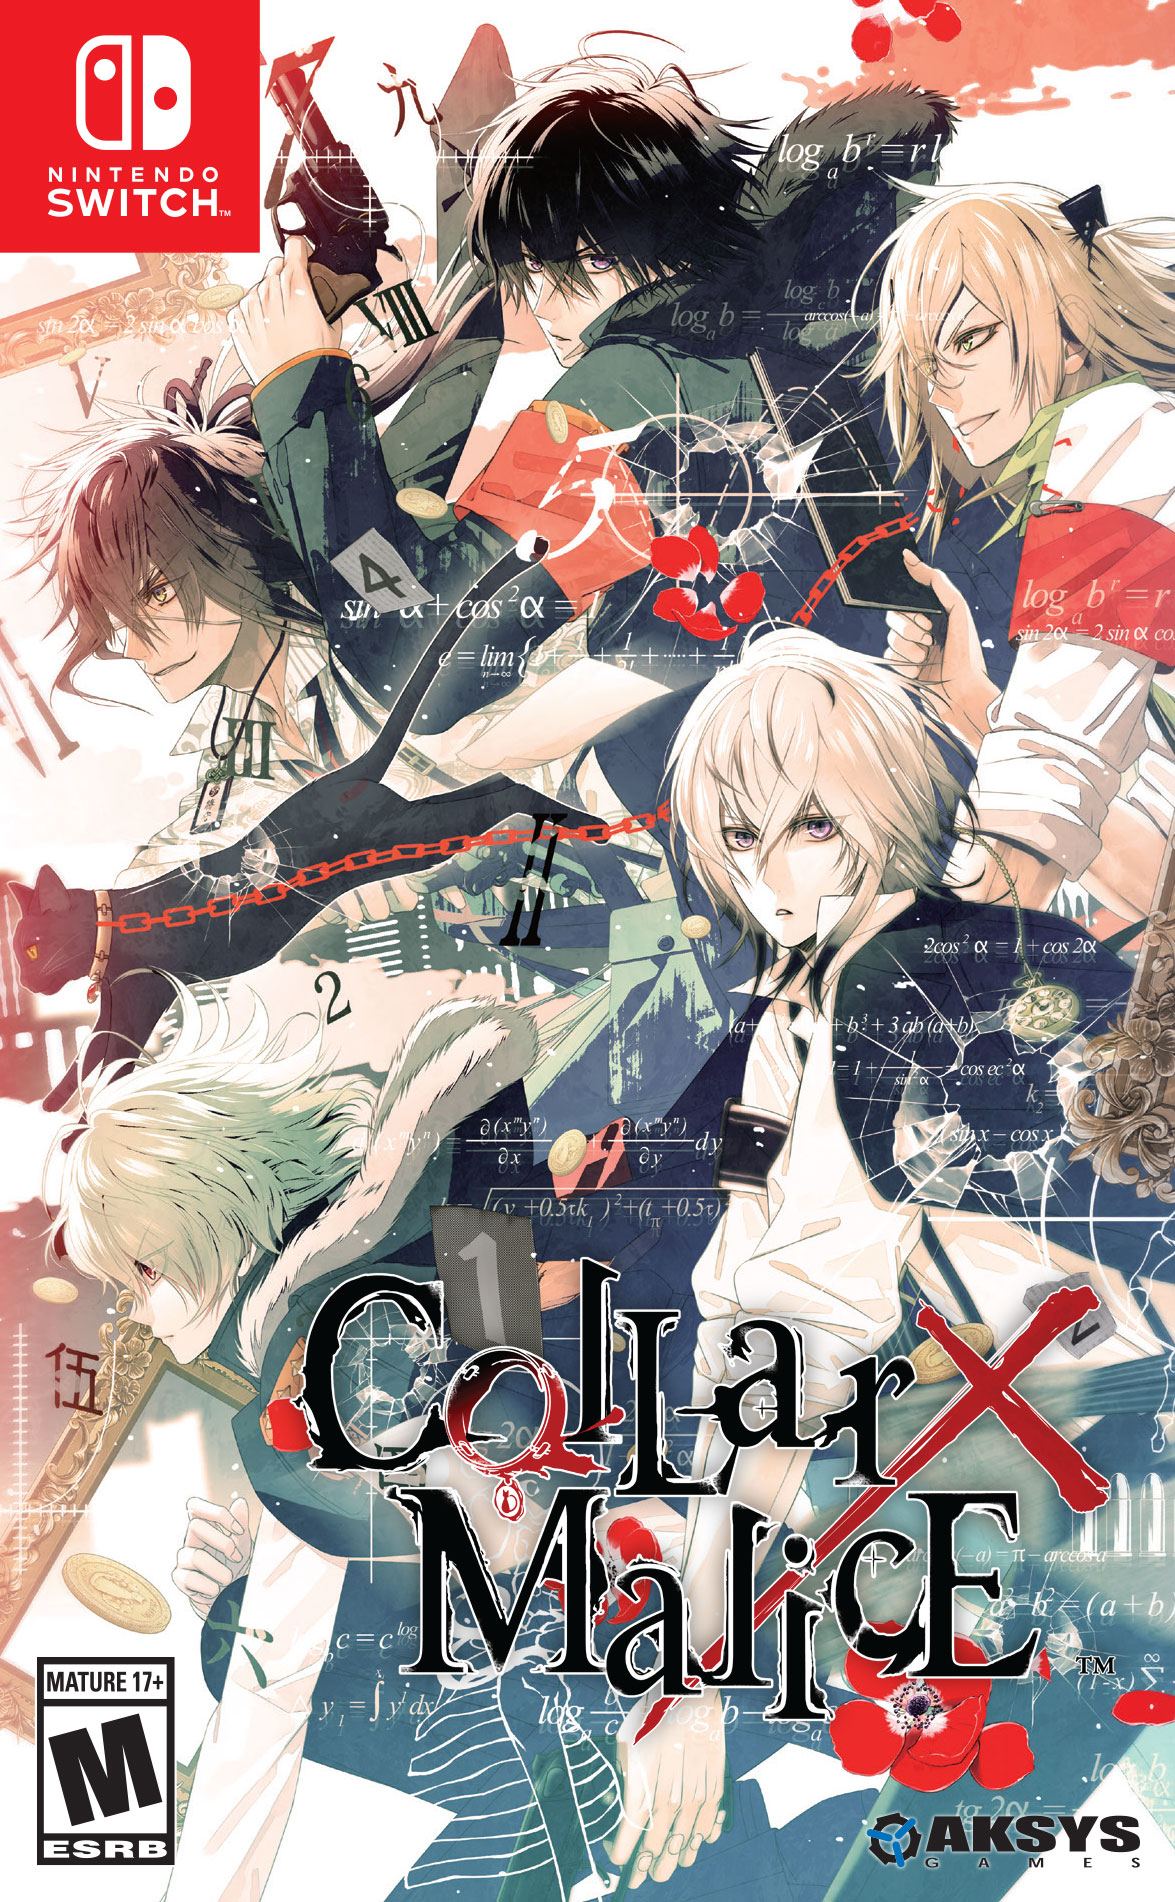 Collar x Malice for Nintendo Switch for Nintendo Switch